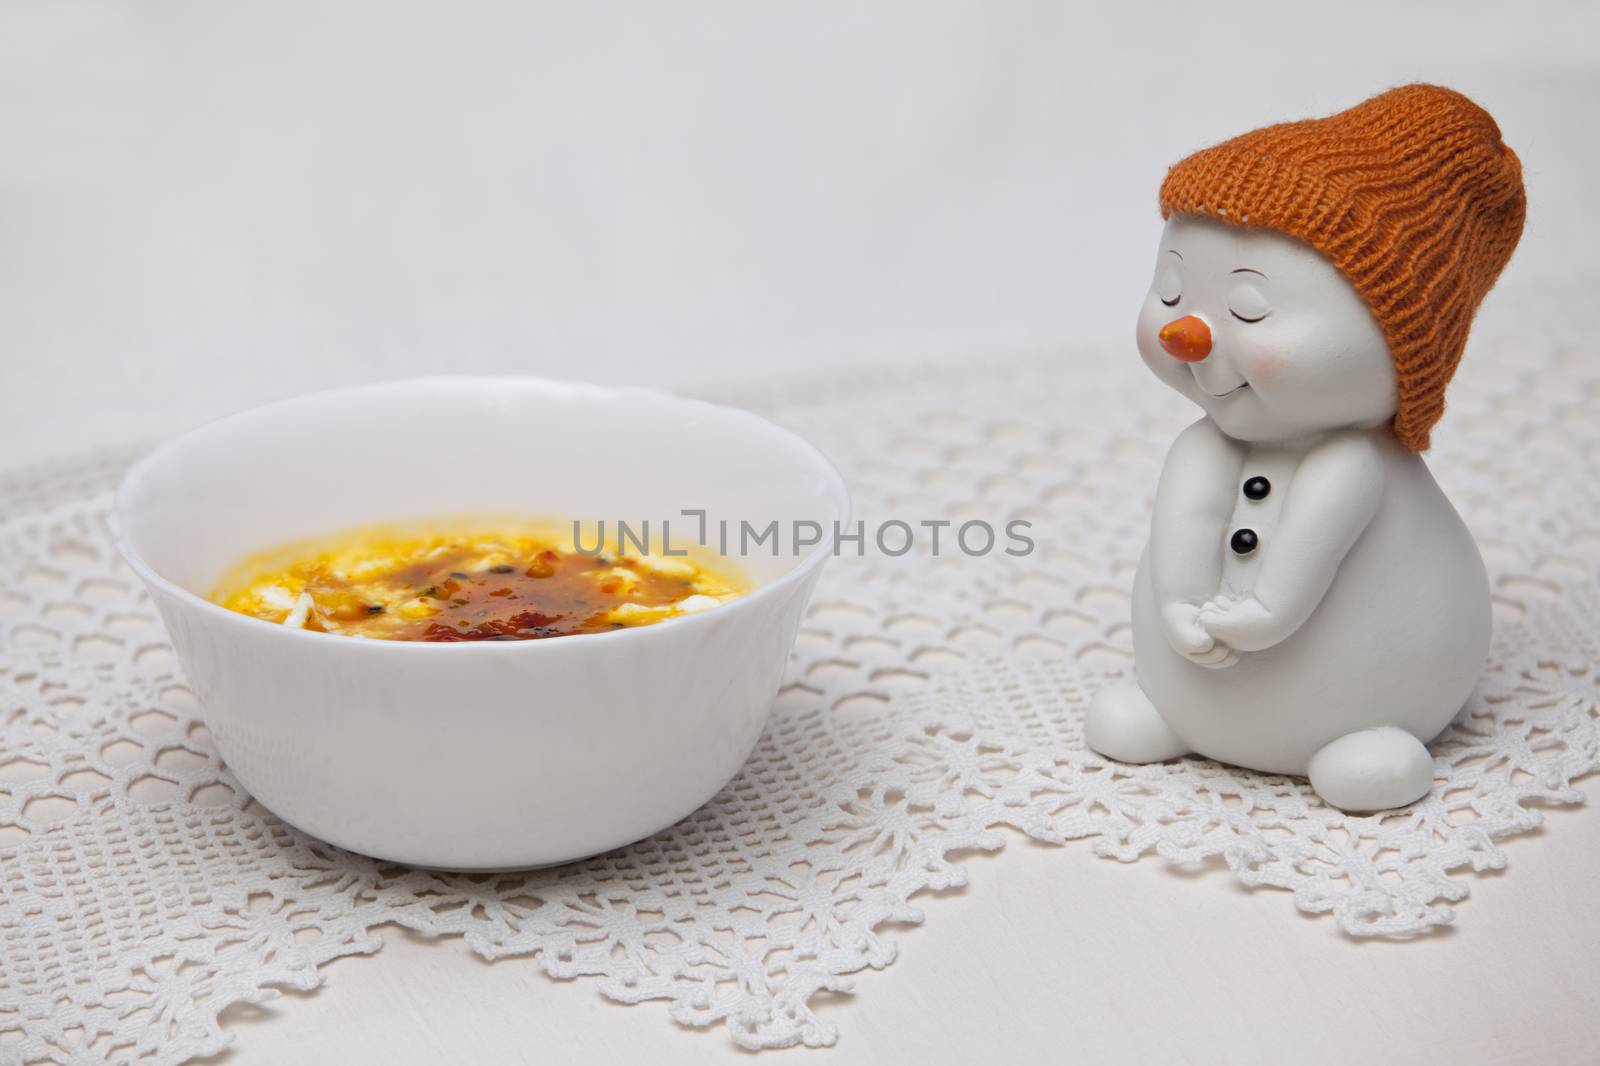 Ice cream cup with jam and a snowman figurine by mrivserg